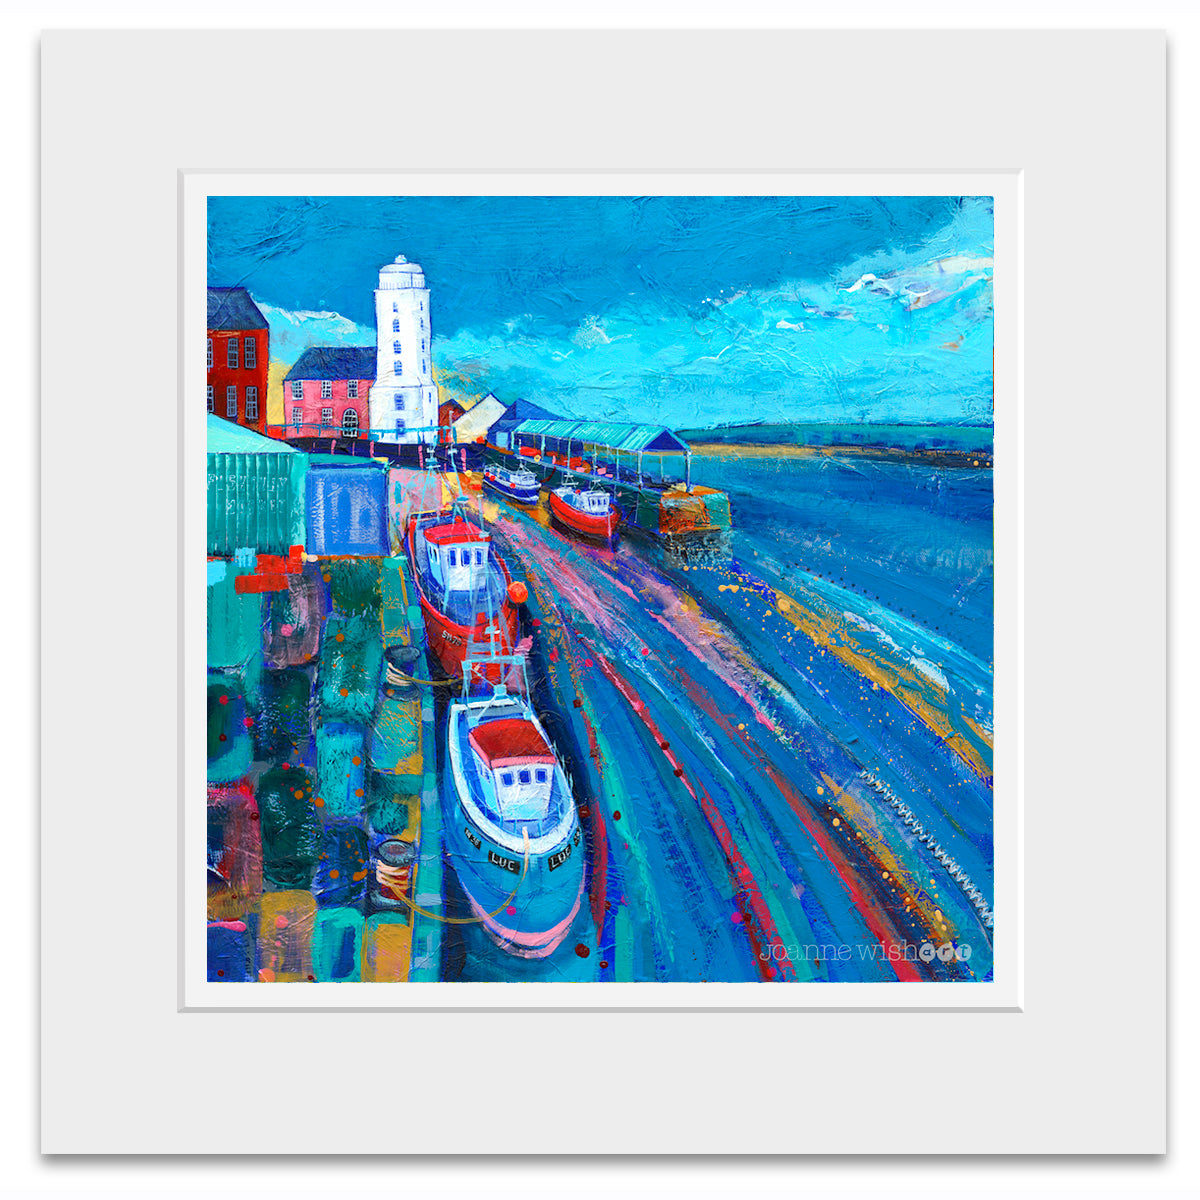 A mounted print of the North Shields Fish Quay.